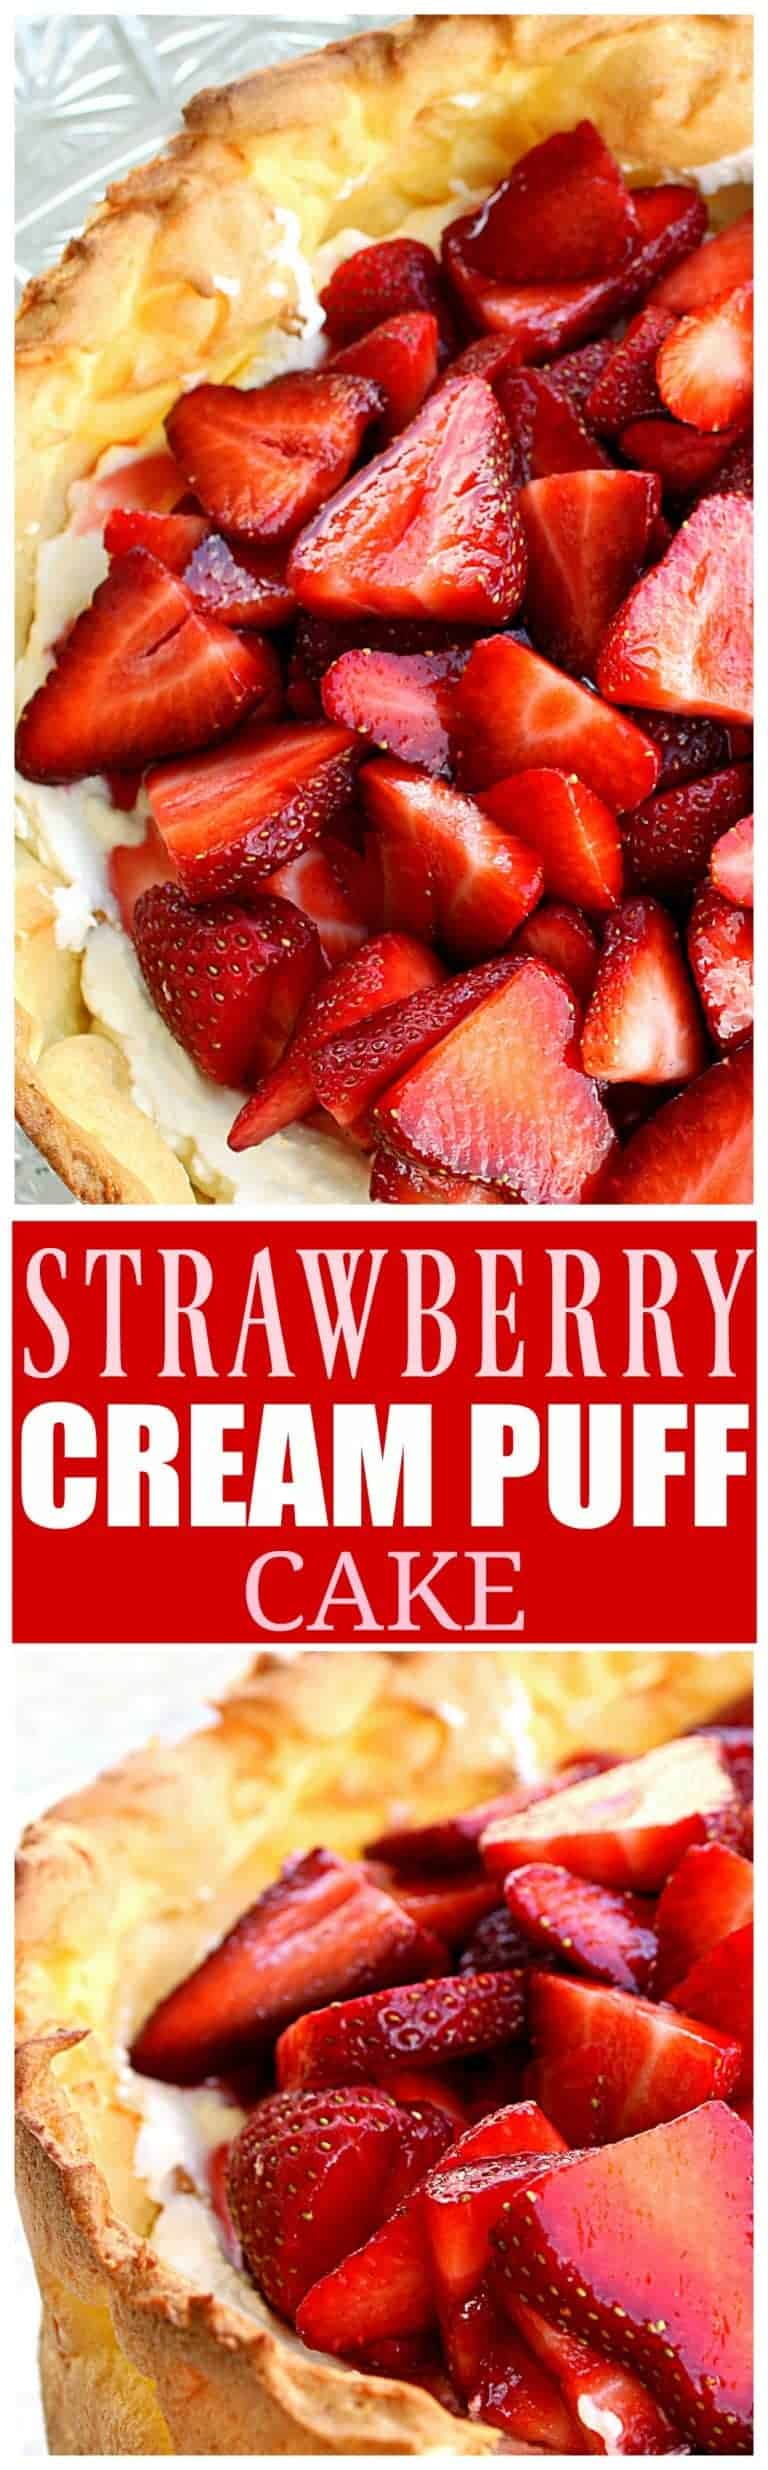 Strawberry Cream Puff Cake - The Girl Who Ate Everything